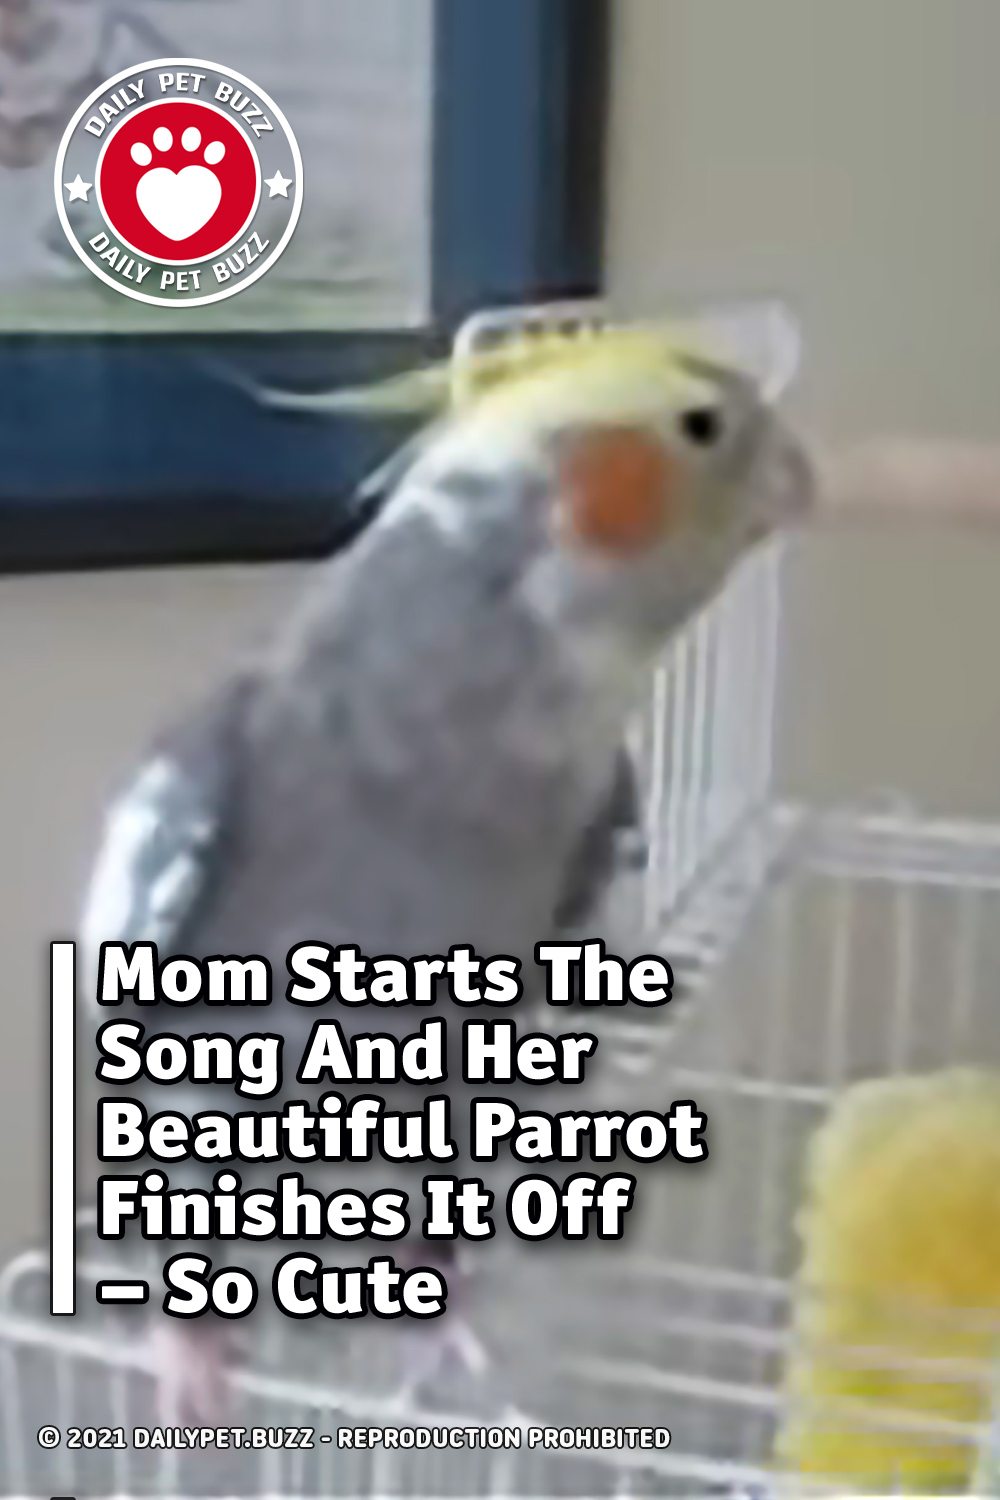 Mom Starts The Song And Her Beautiful Parrot Finishes It Off – So Cute